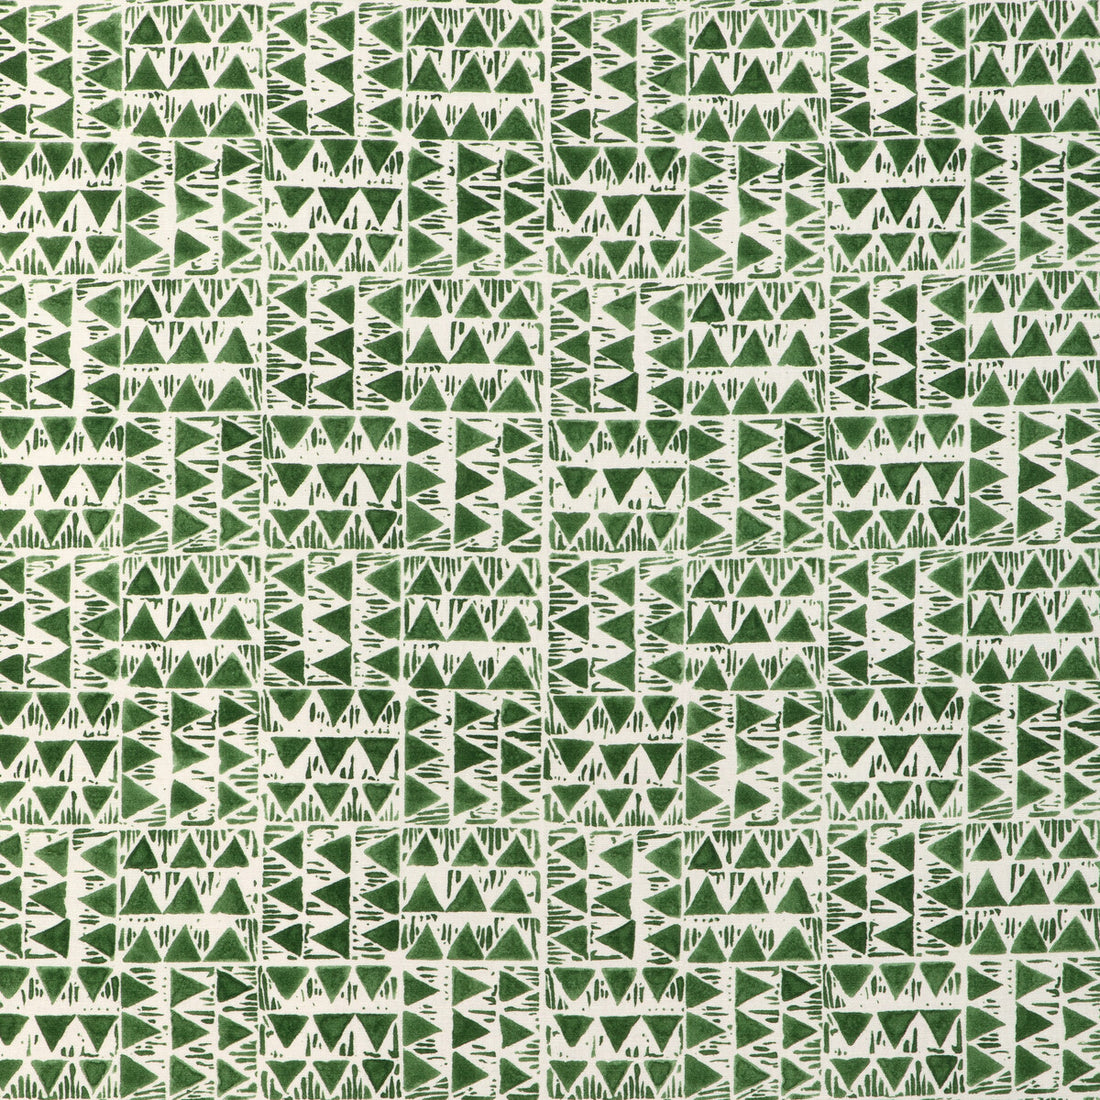 Yampa Print fabric in fern color - pattern 2020210.3.0 - by Lee Jofa in the Clare Prints collection